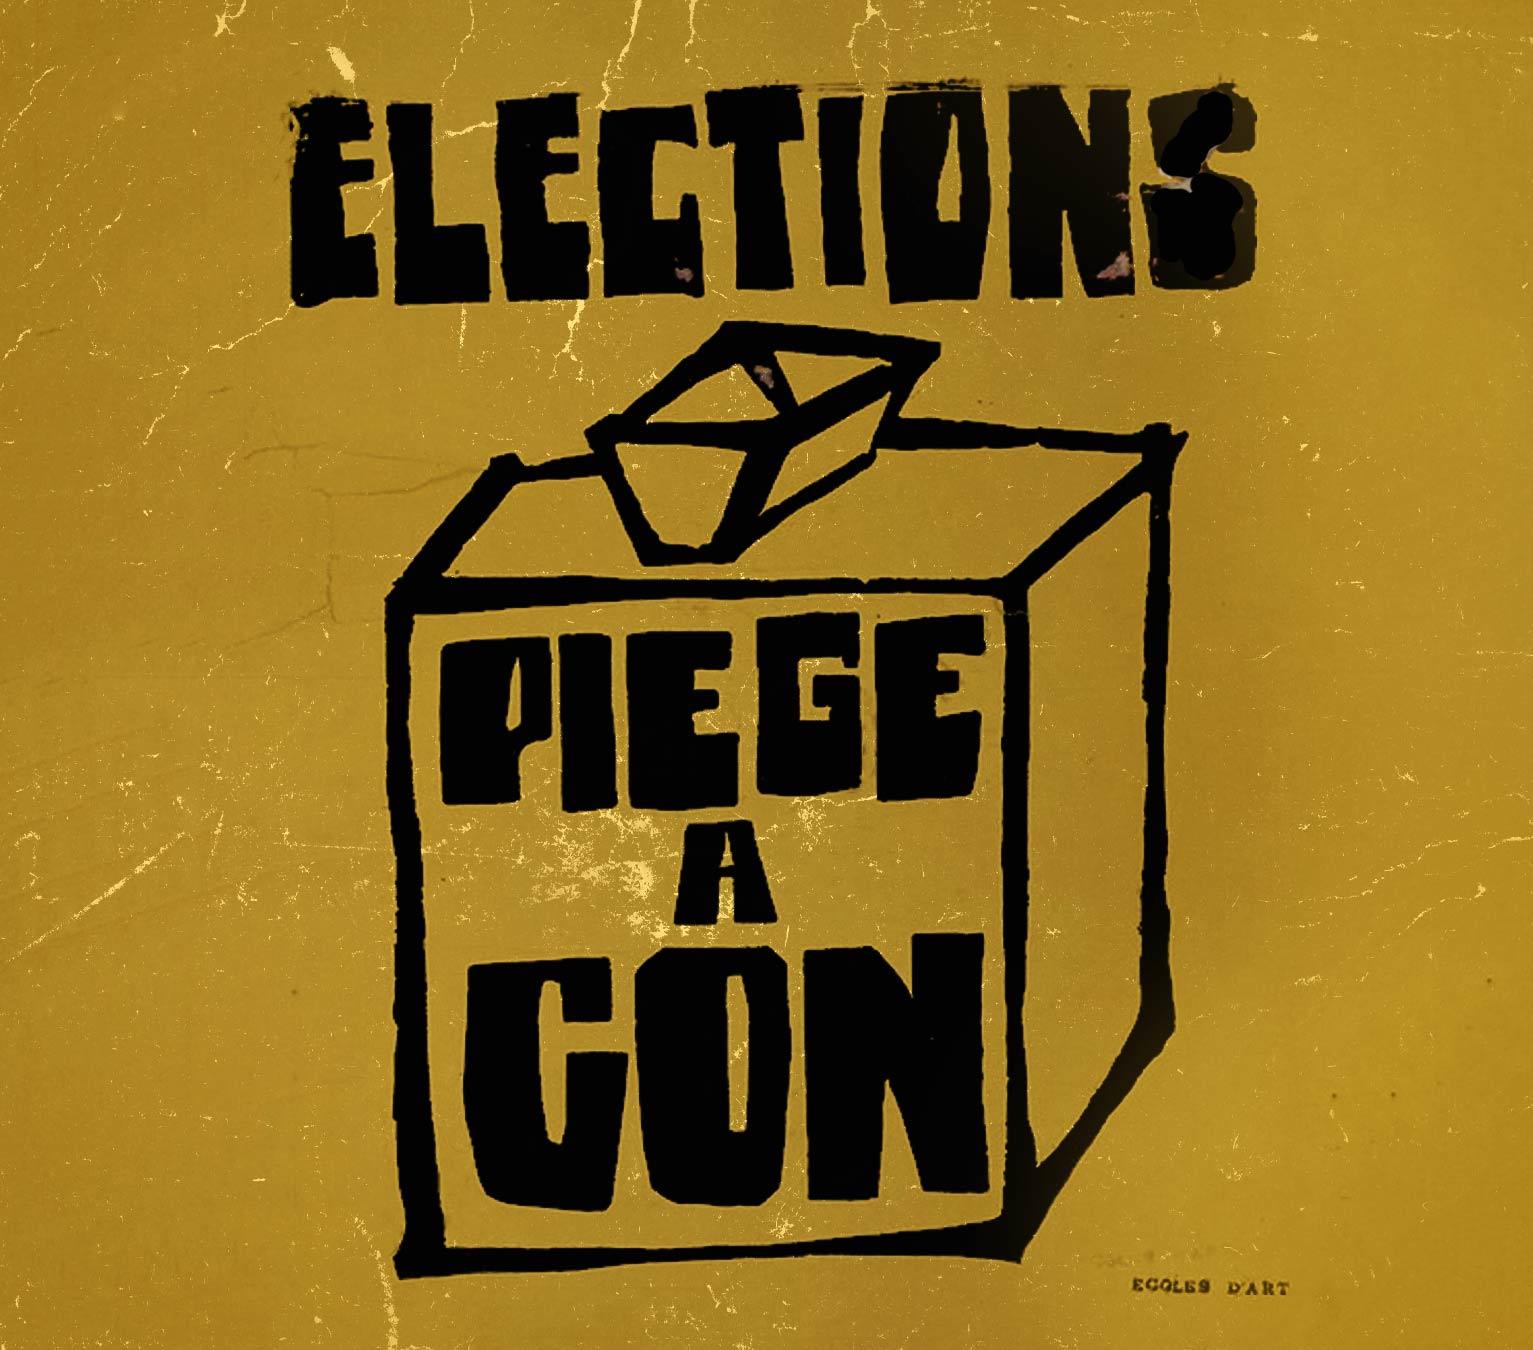 Illustration (“Elections - Fools’ trap”, slogan created during the protests in May ’68 and famously used by JP Sartre in a ’73 article): poster, 1968. Paris, National Library